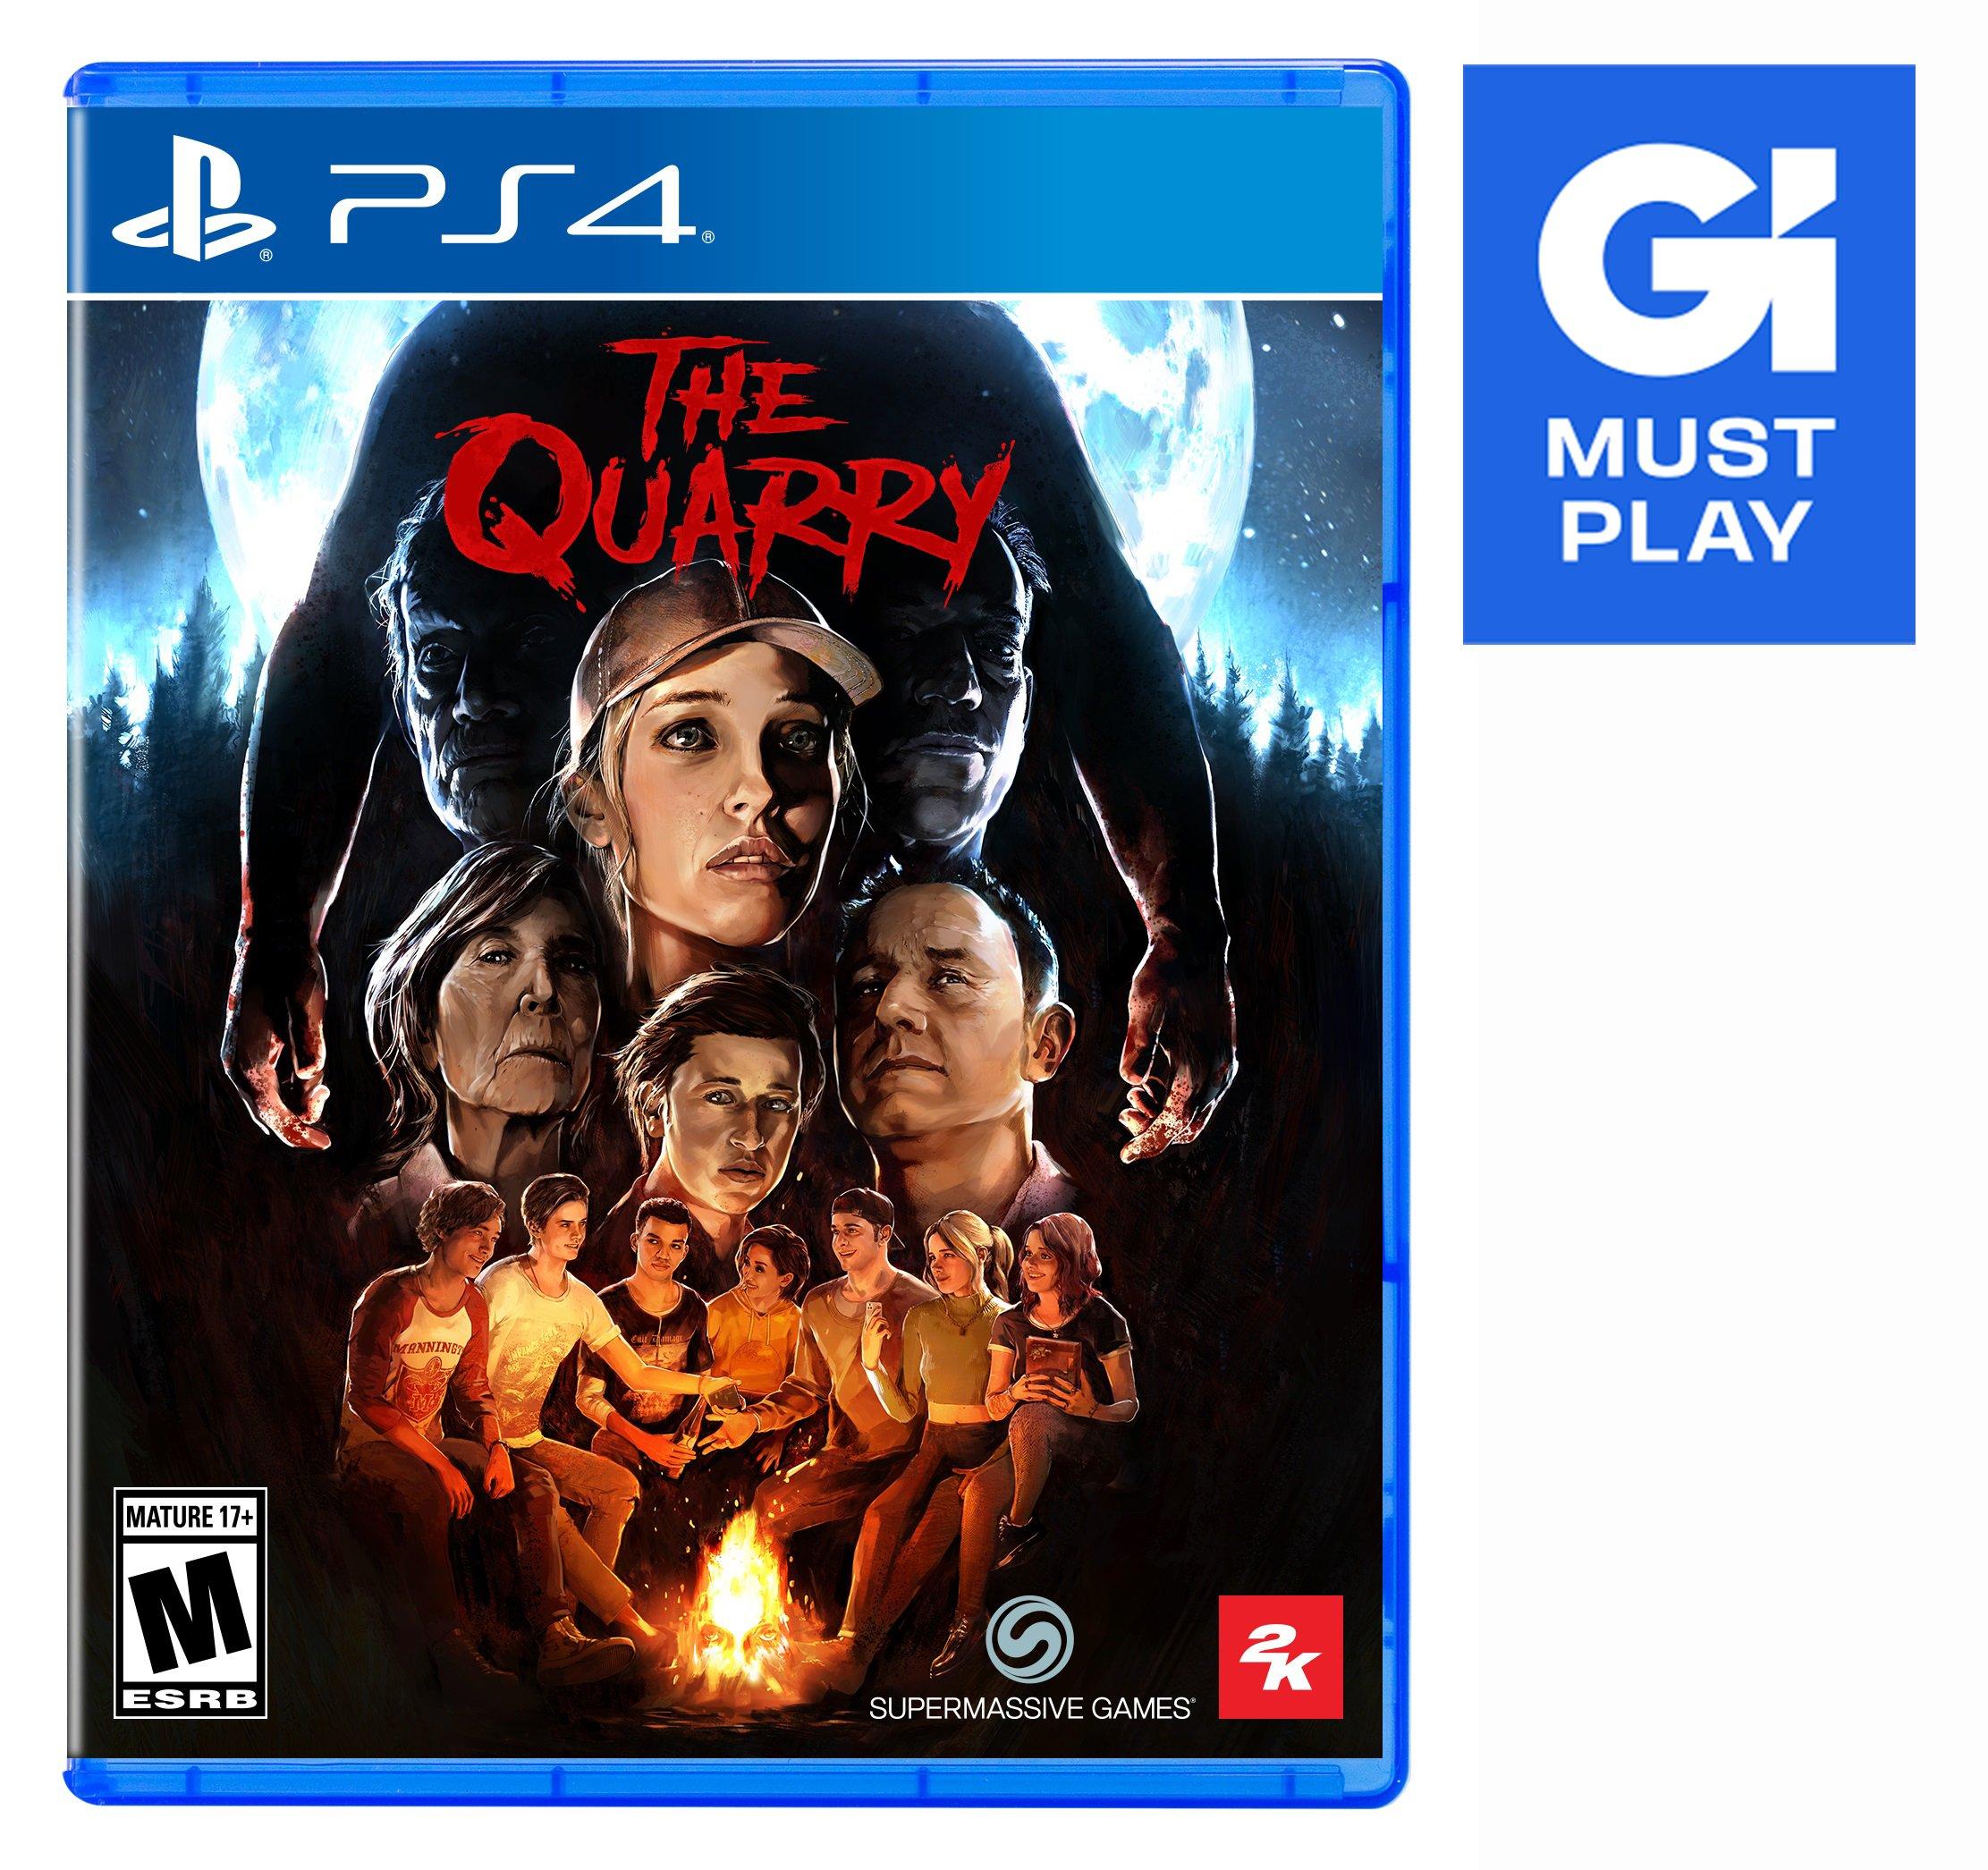 New horror game The Quarry is a love letter to campy teen slashers